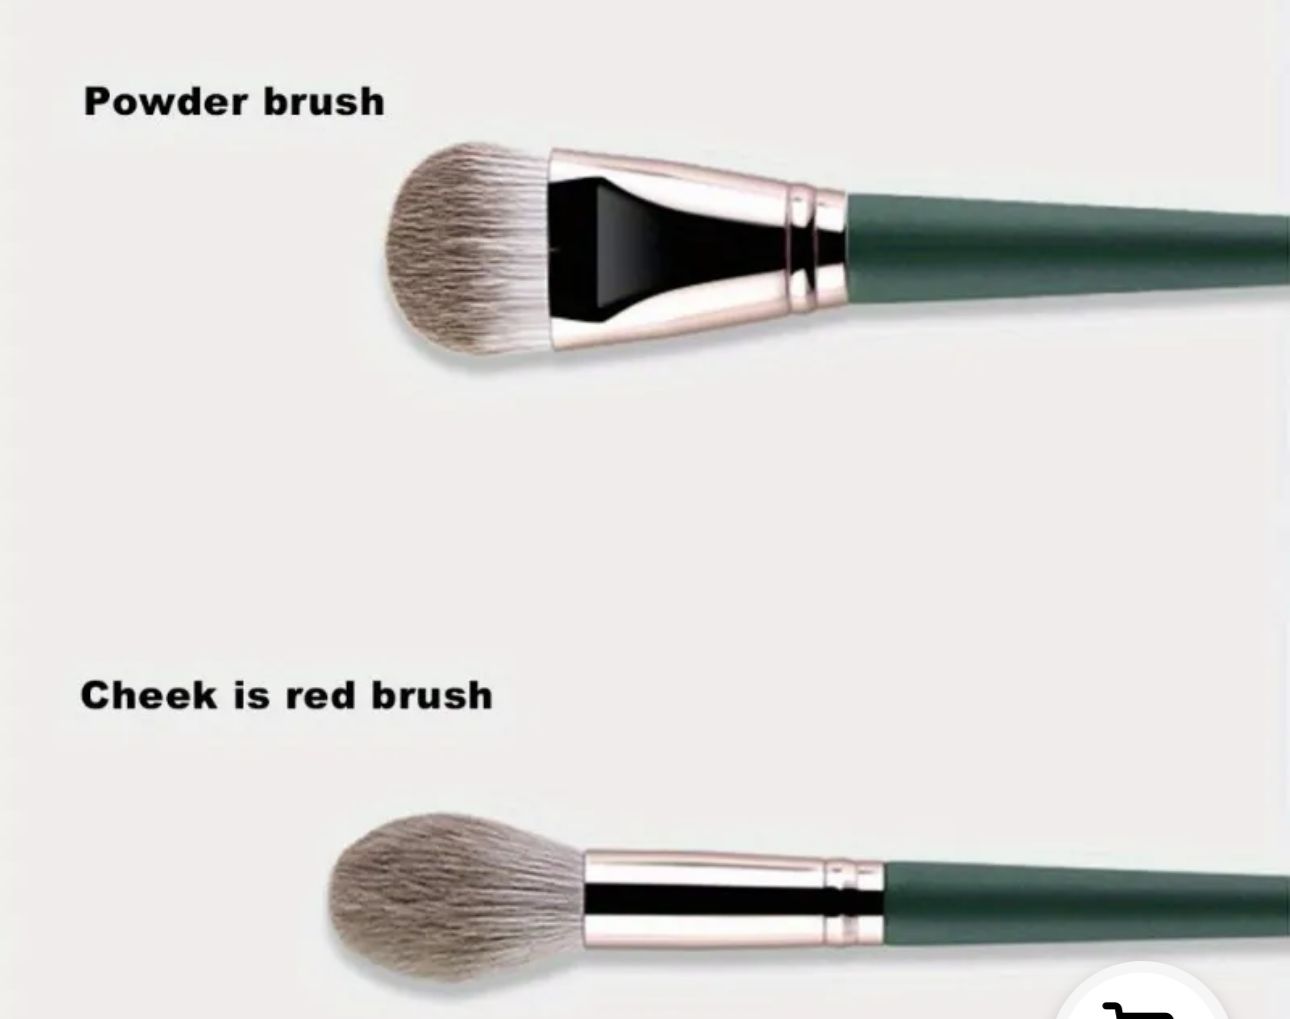 Get Powder and Cheek Is Red Brush for Face - Cilios